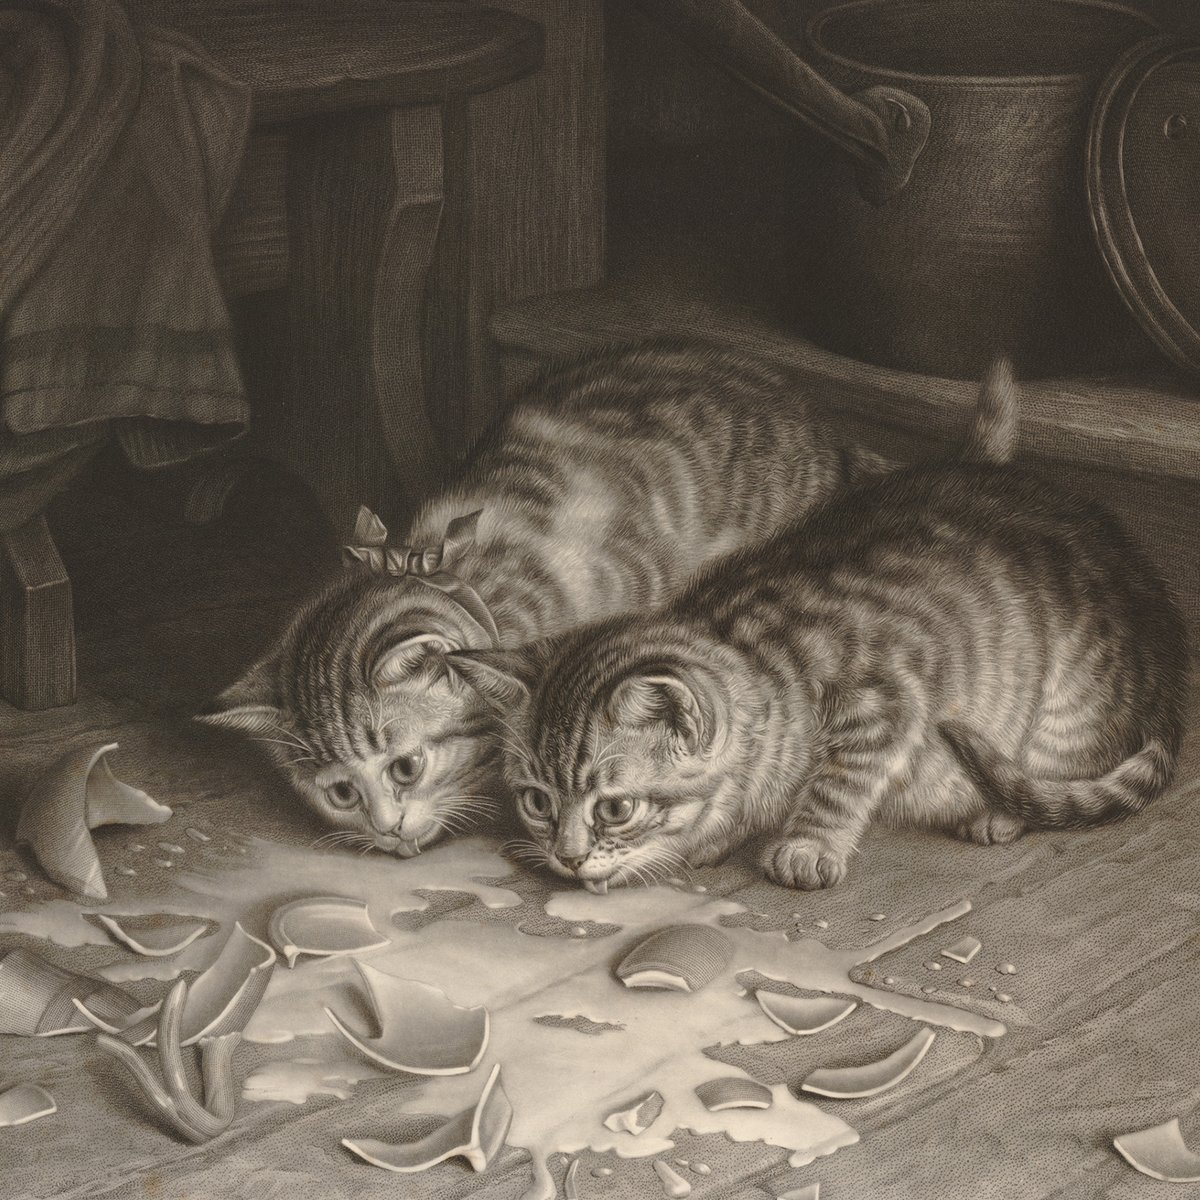 A black and white print of a tabby kitten tipping a bottle of ink over a will laid out on a writing desk on the right, with a quill pen, spectacles, deeds, letter filing box and chest on the table. 